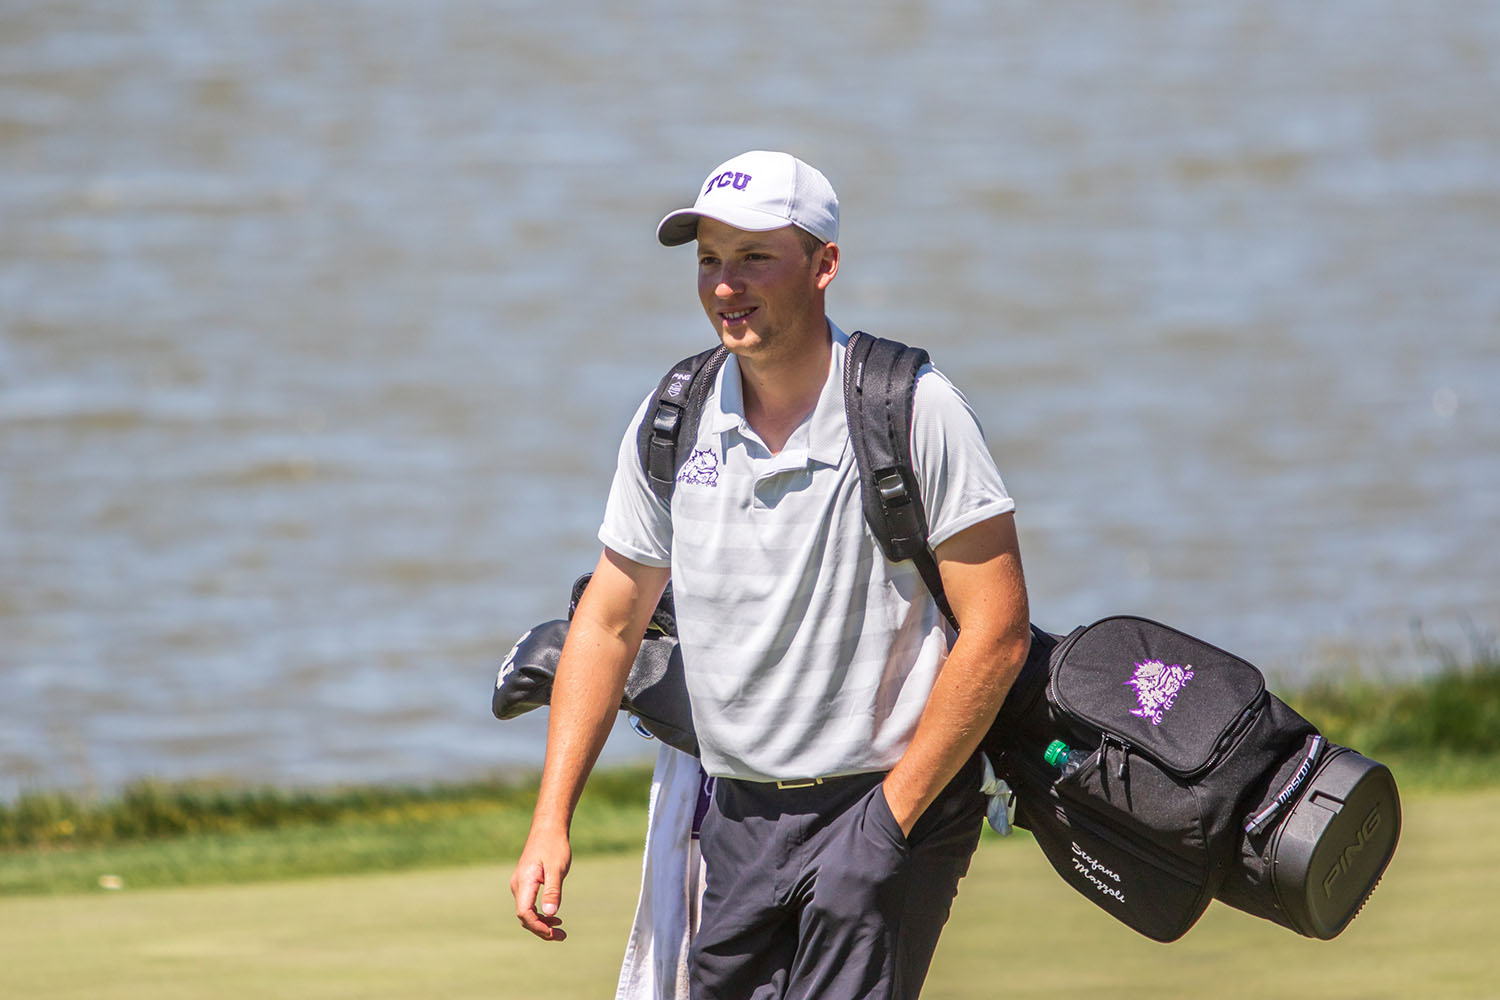 Men's golf moves to 10th place, Mazzoli tied for lead at Nike